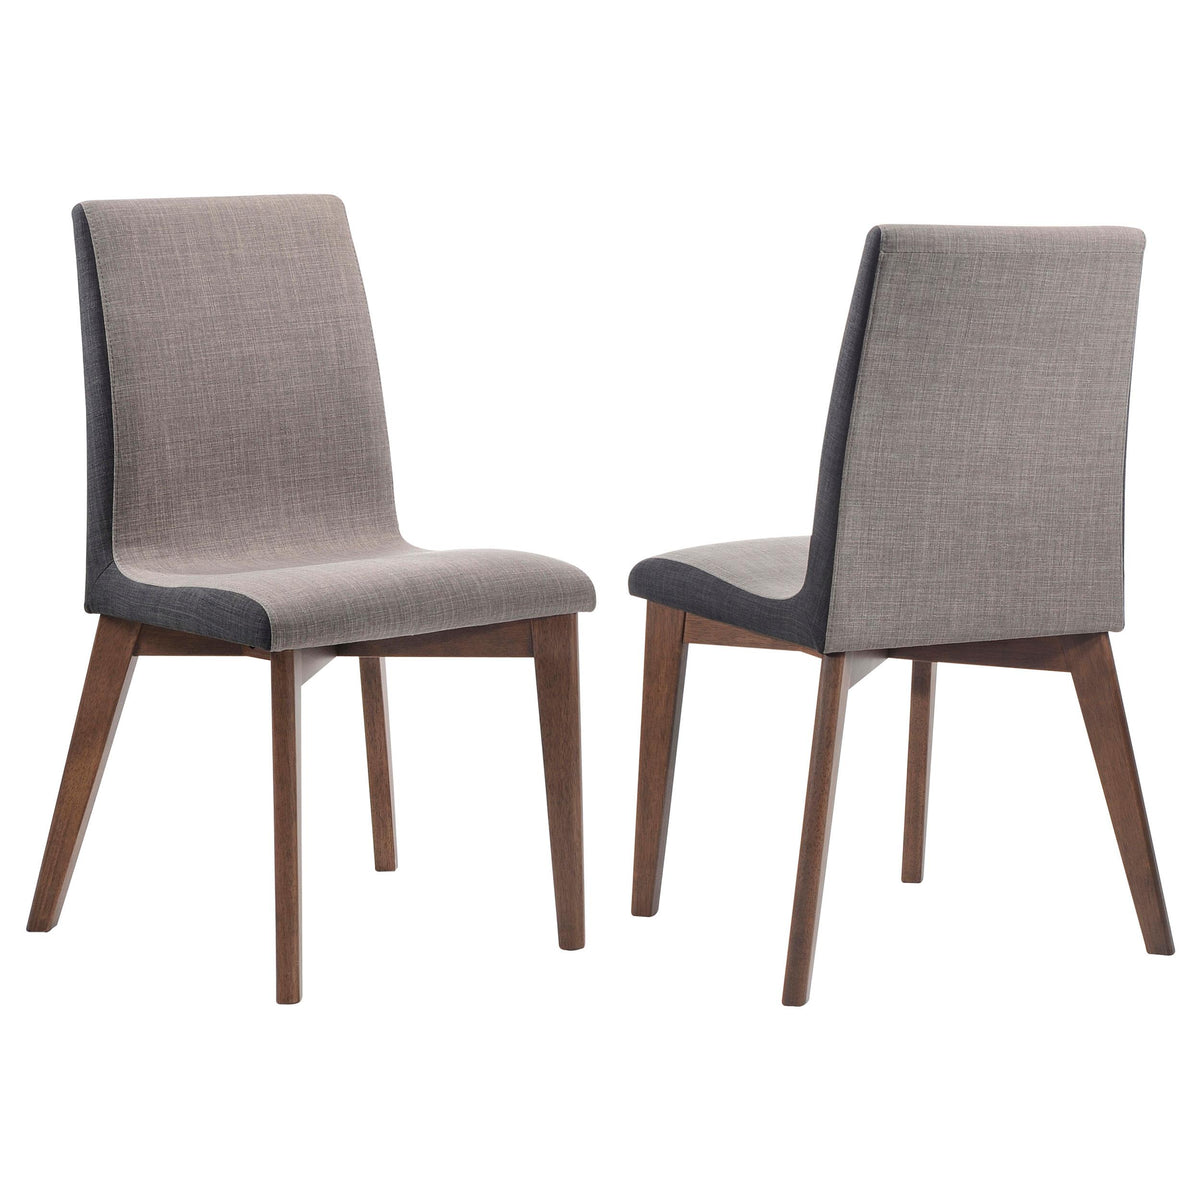 Redbridge Upholstered Side Chairs Grey and Natural Walnut (Set of 2) Redbridge Upholstered Side Chairs Grey and Natural Walnut (Set of 2) Half Price Furniture